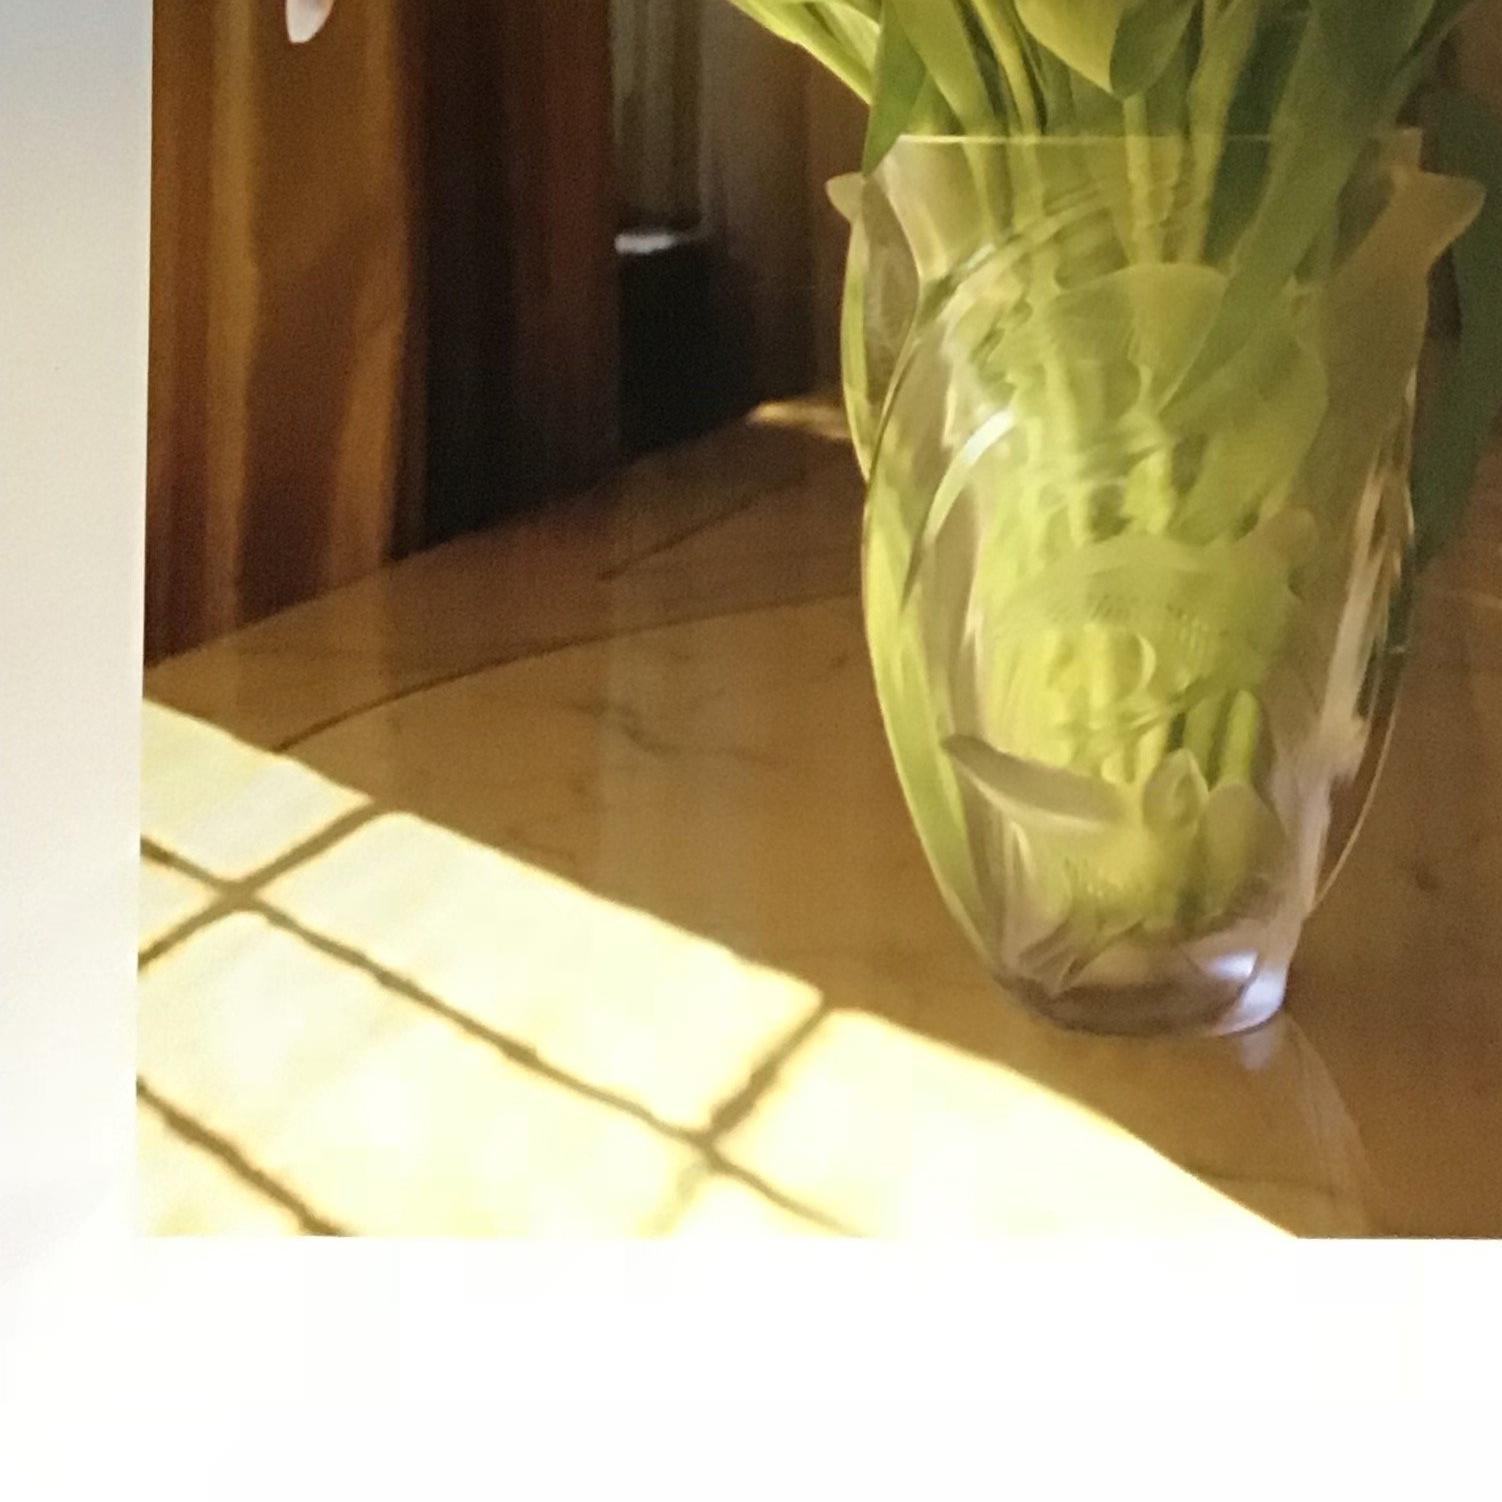 signed enhanced photographic print 2010 whimsical and beautiful soft light still life of flowers in a vase unframed